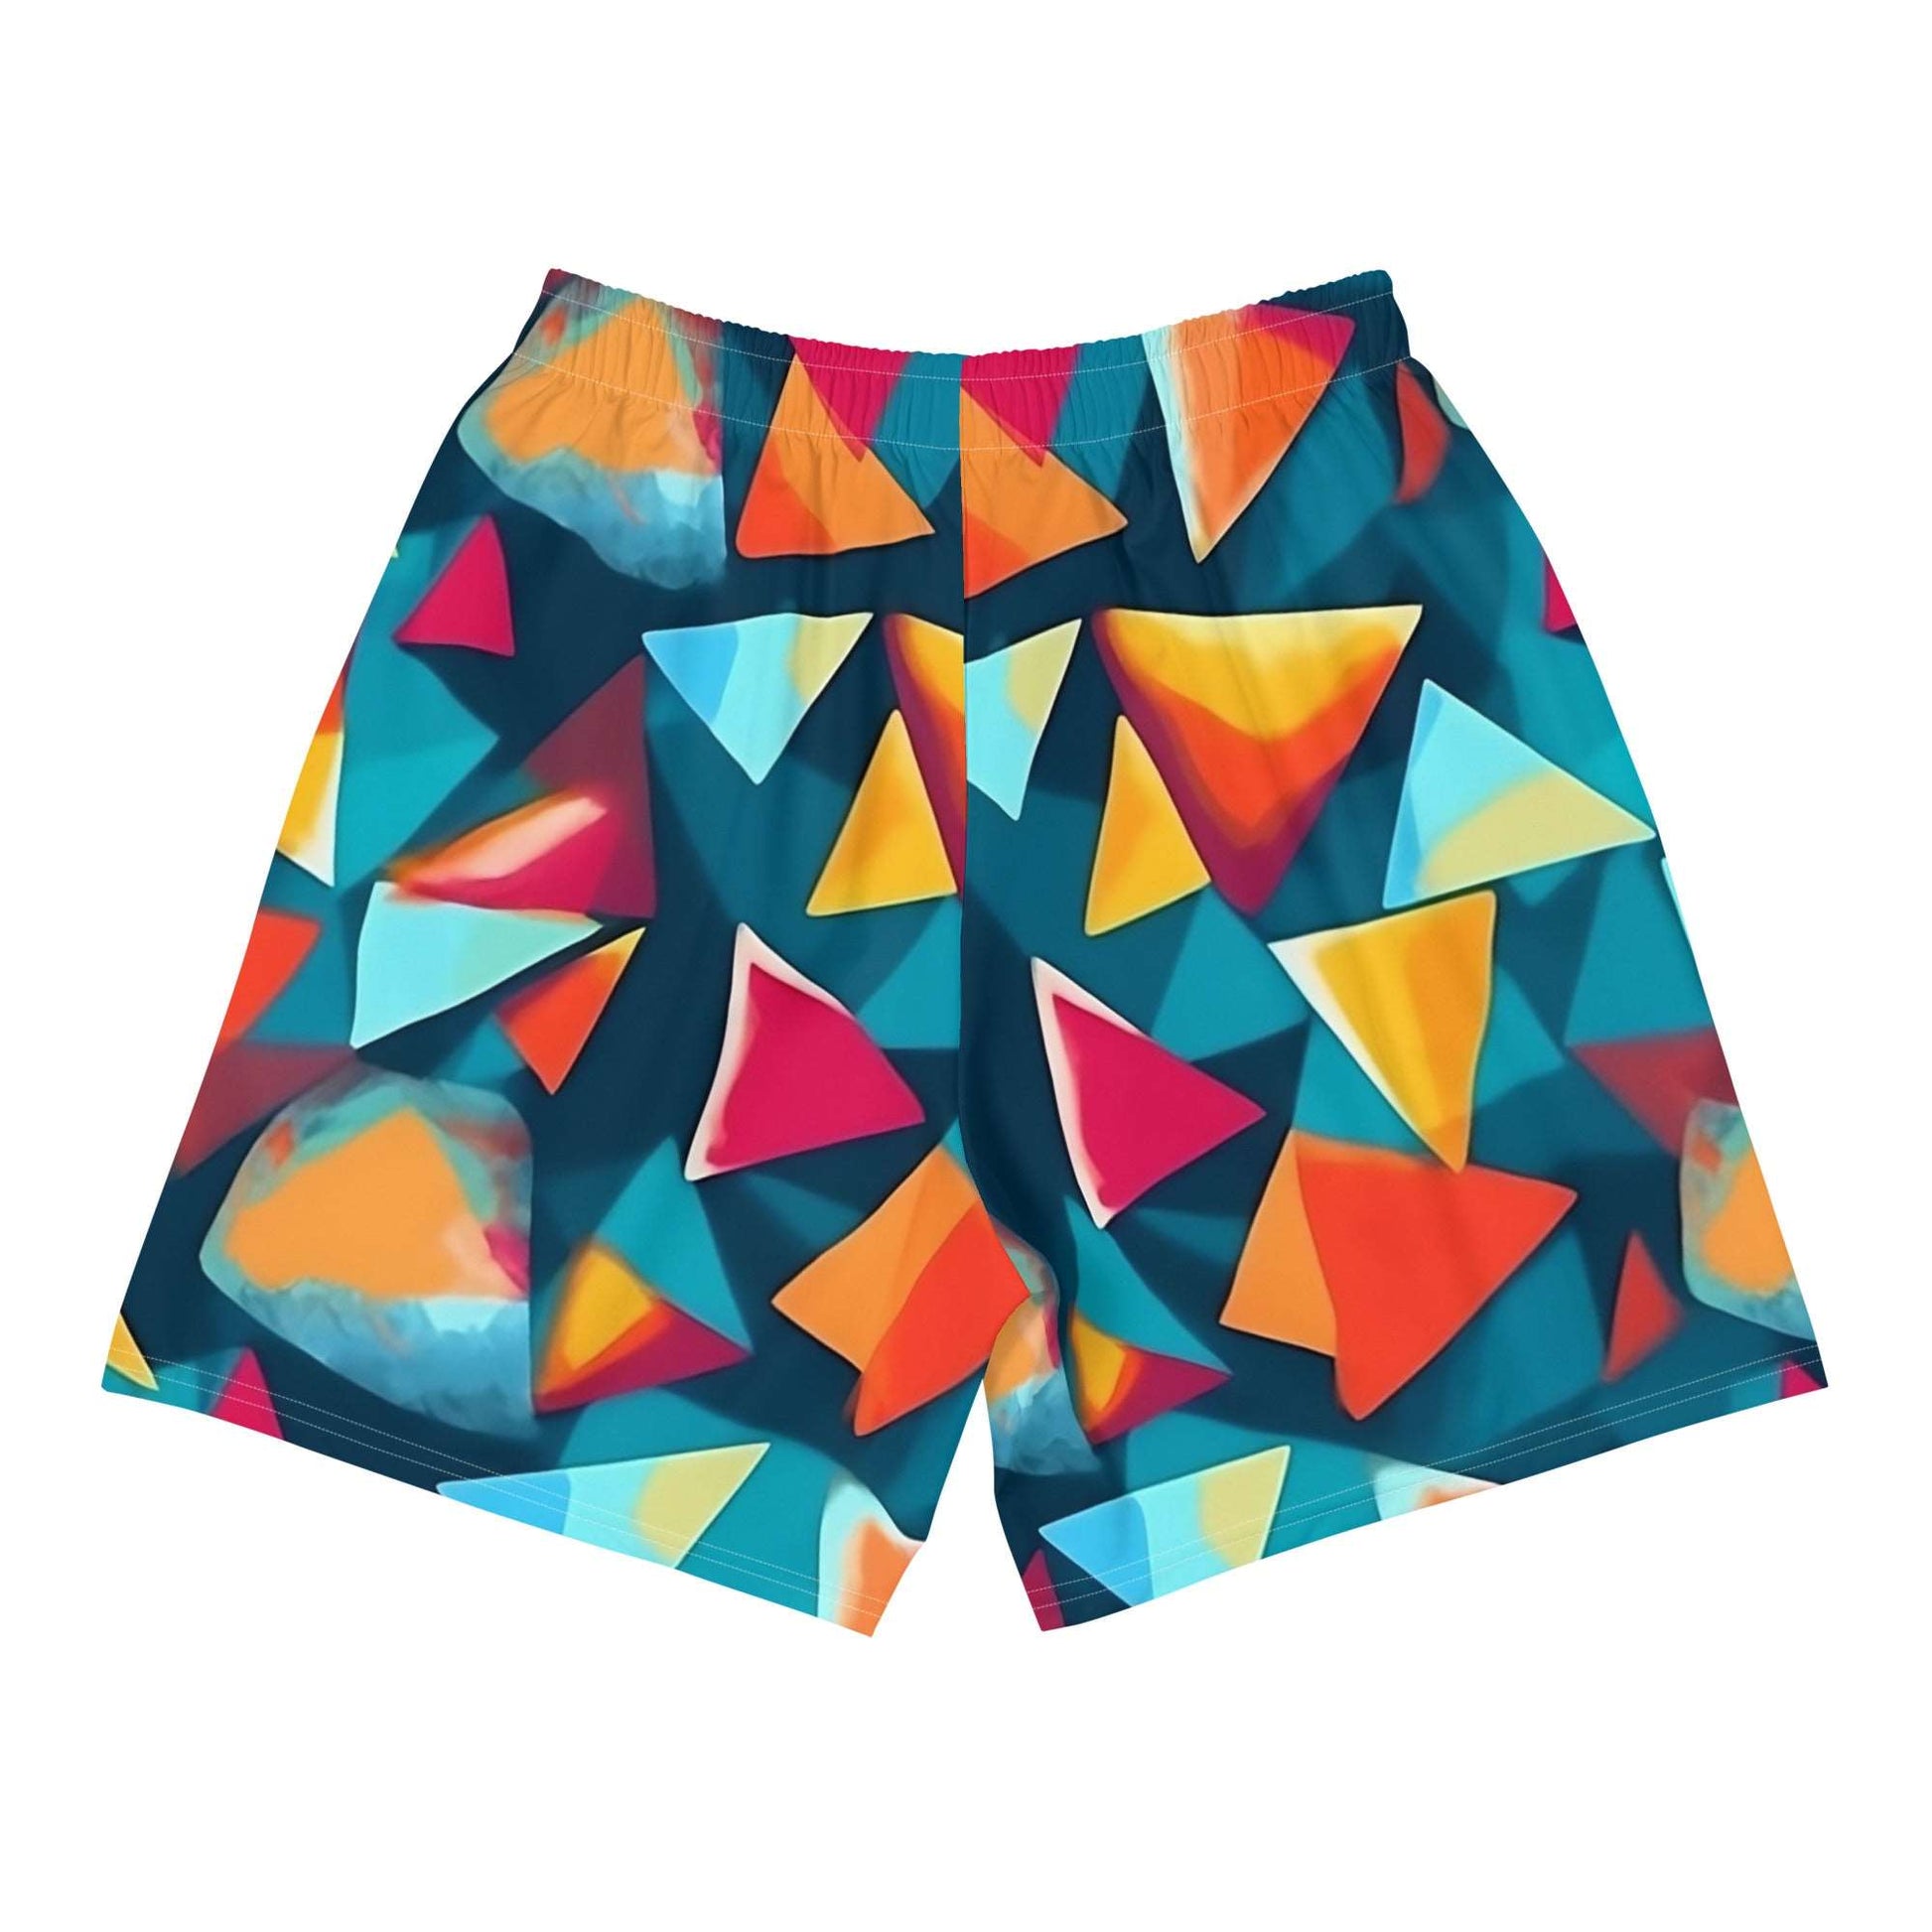 back of pyramid shorts by B.Different Clothing independent streetwear inspired by street art graffiti